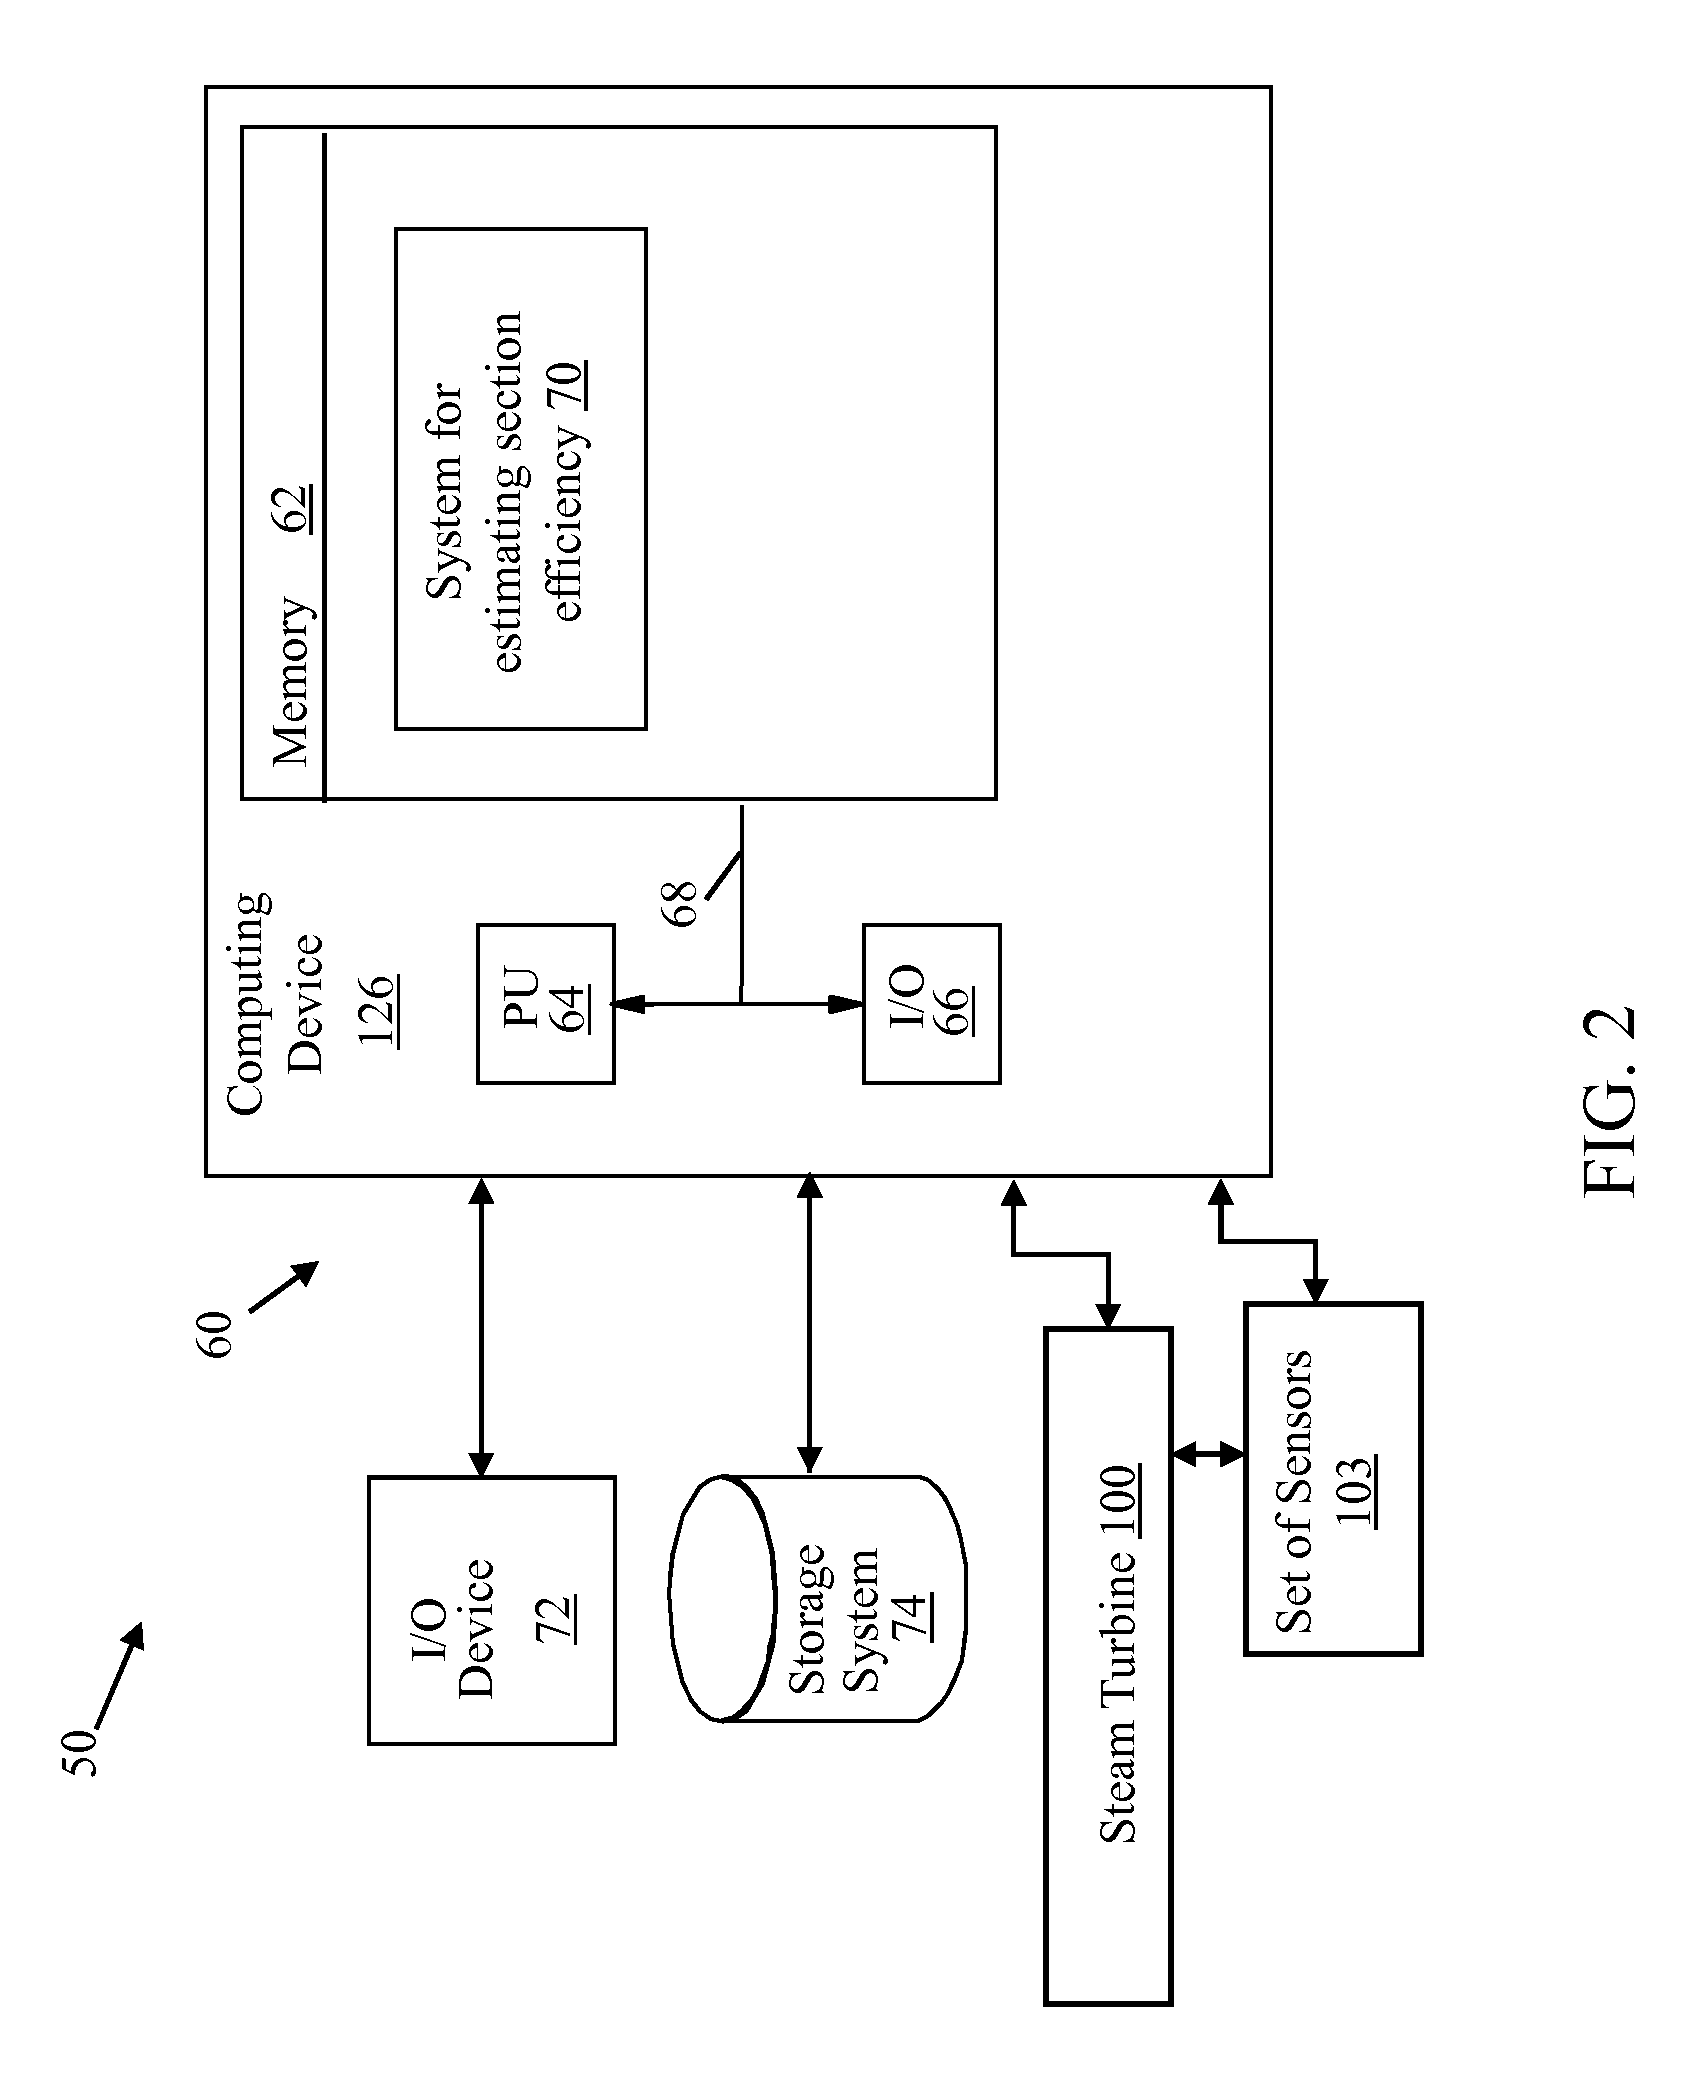 Virtual sensor systems and methods for estimation of steam turbine sectional efficiencies